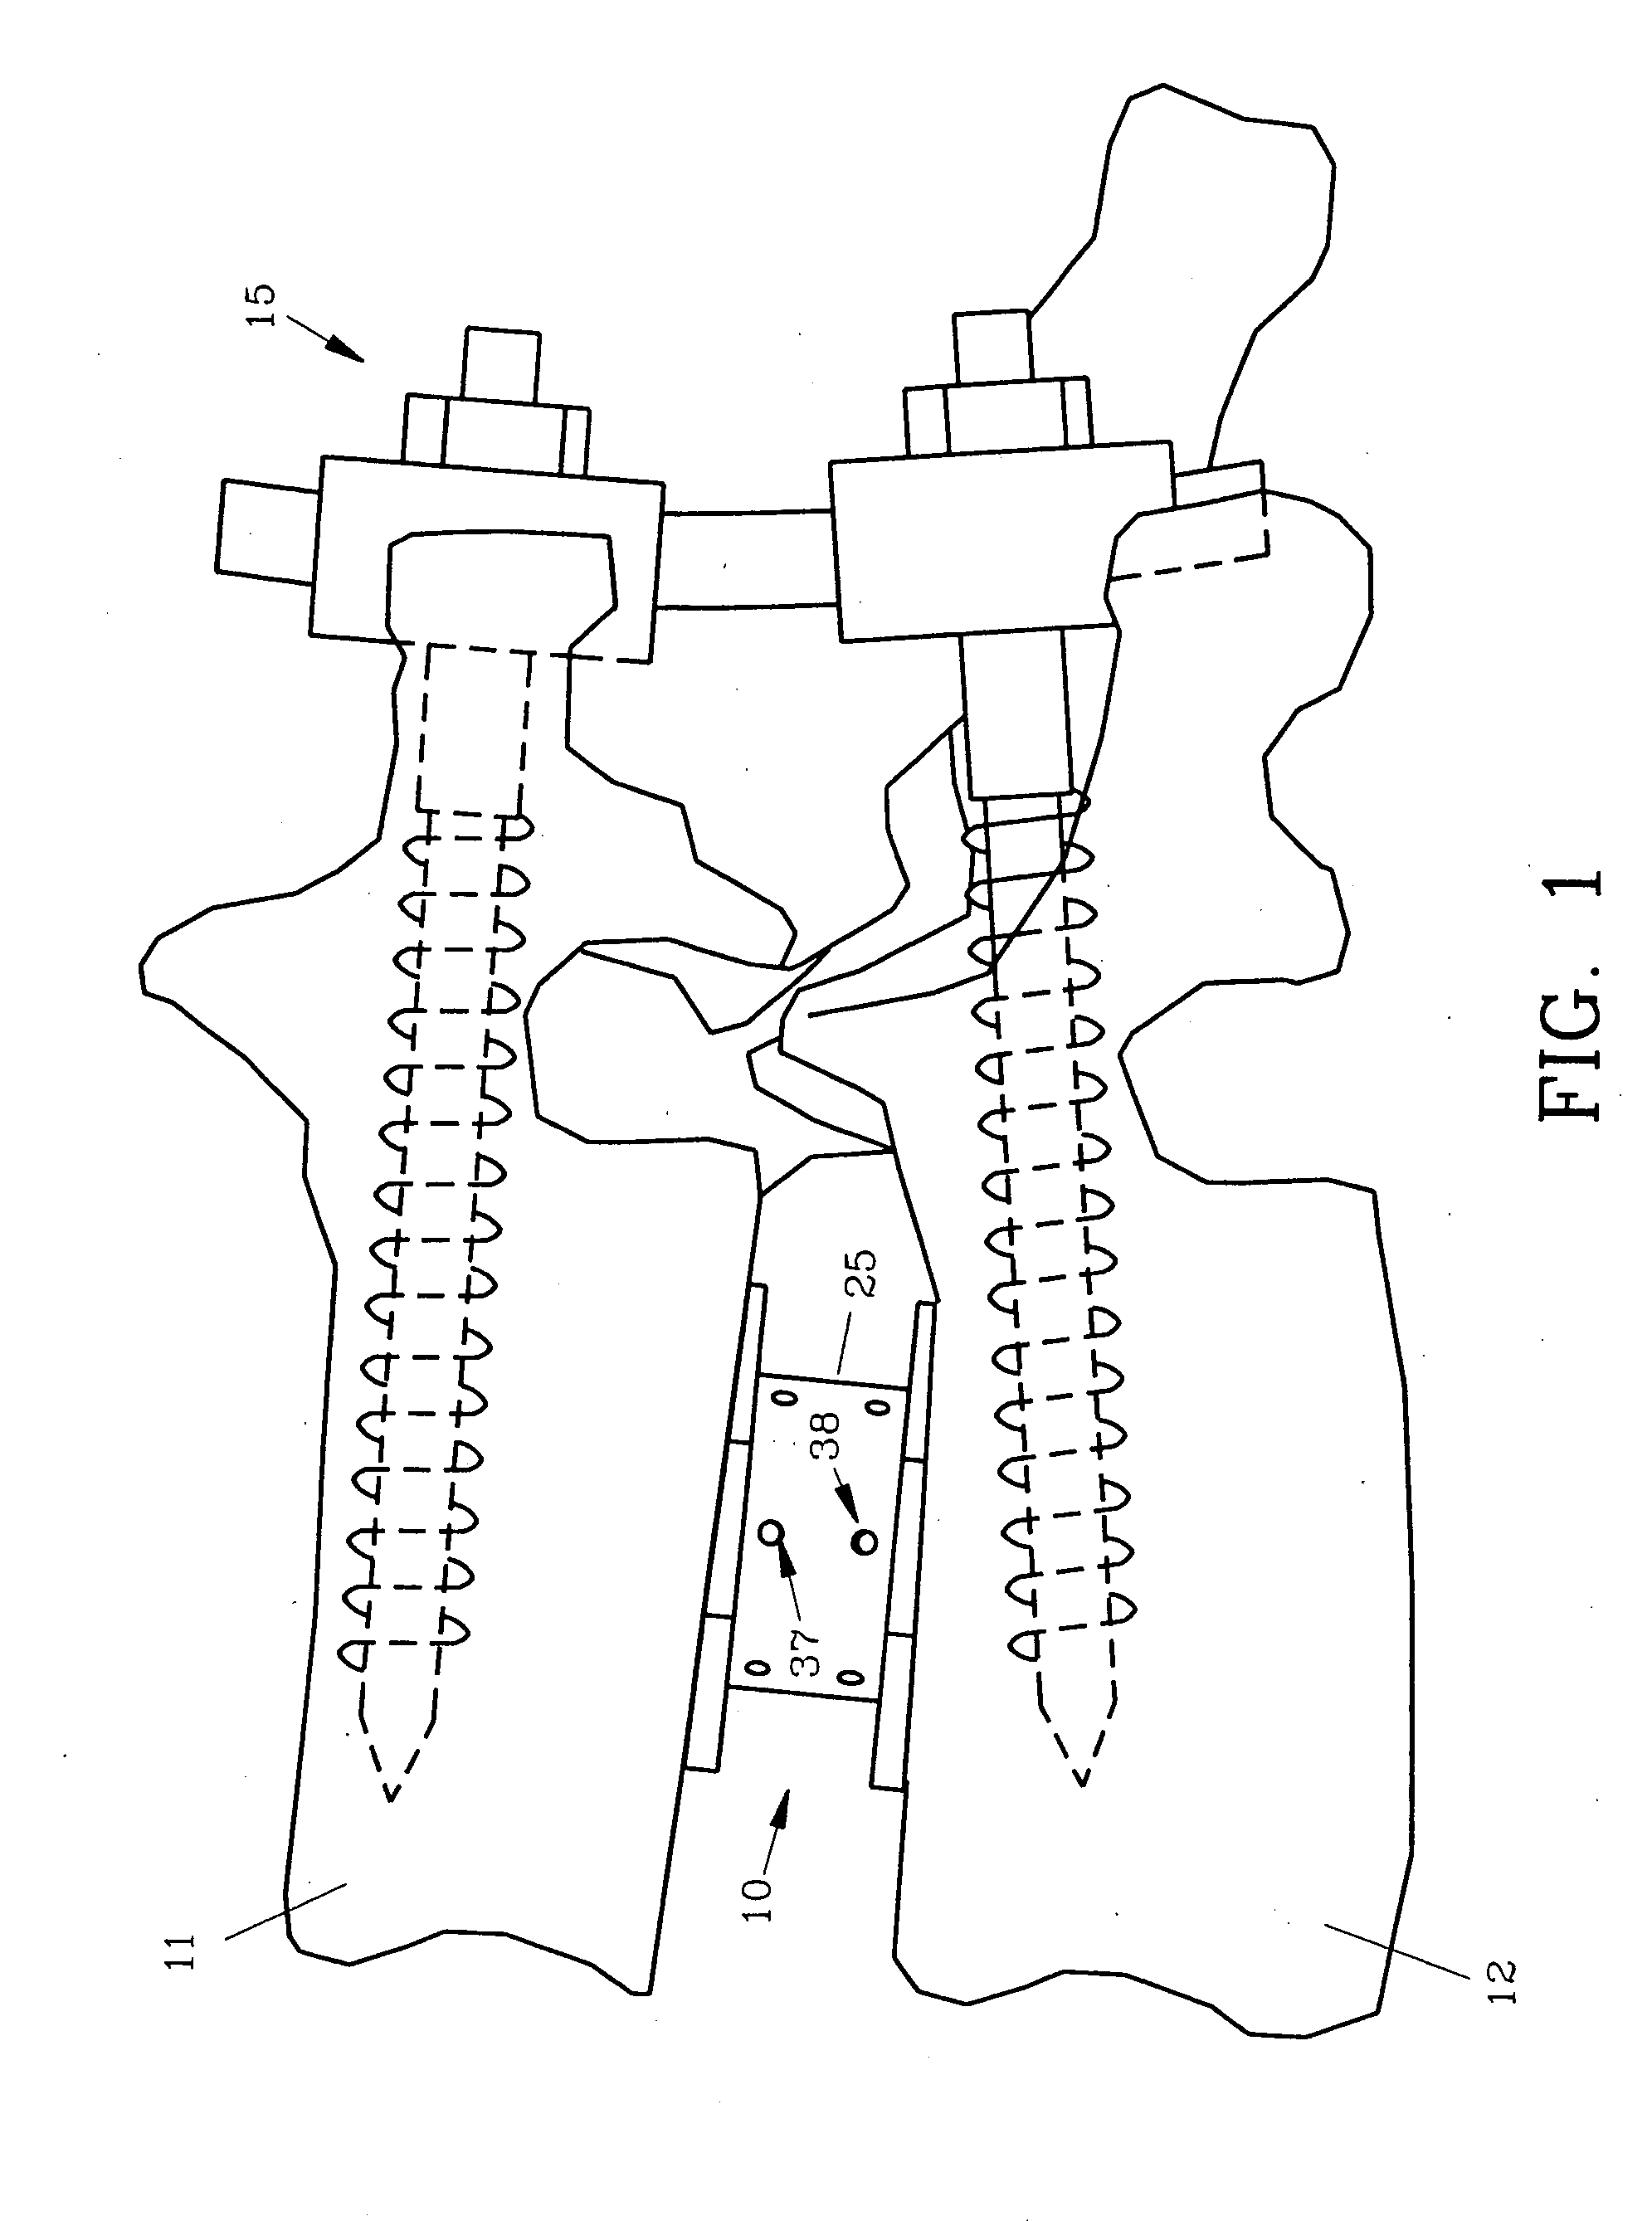 Spinal interbody fusion device and method